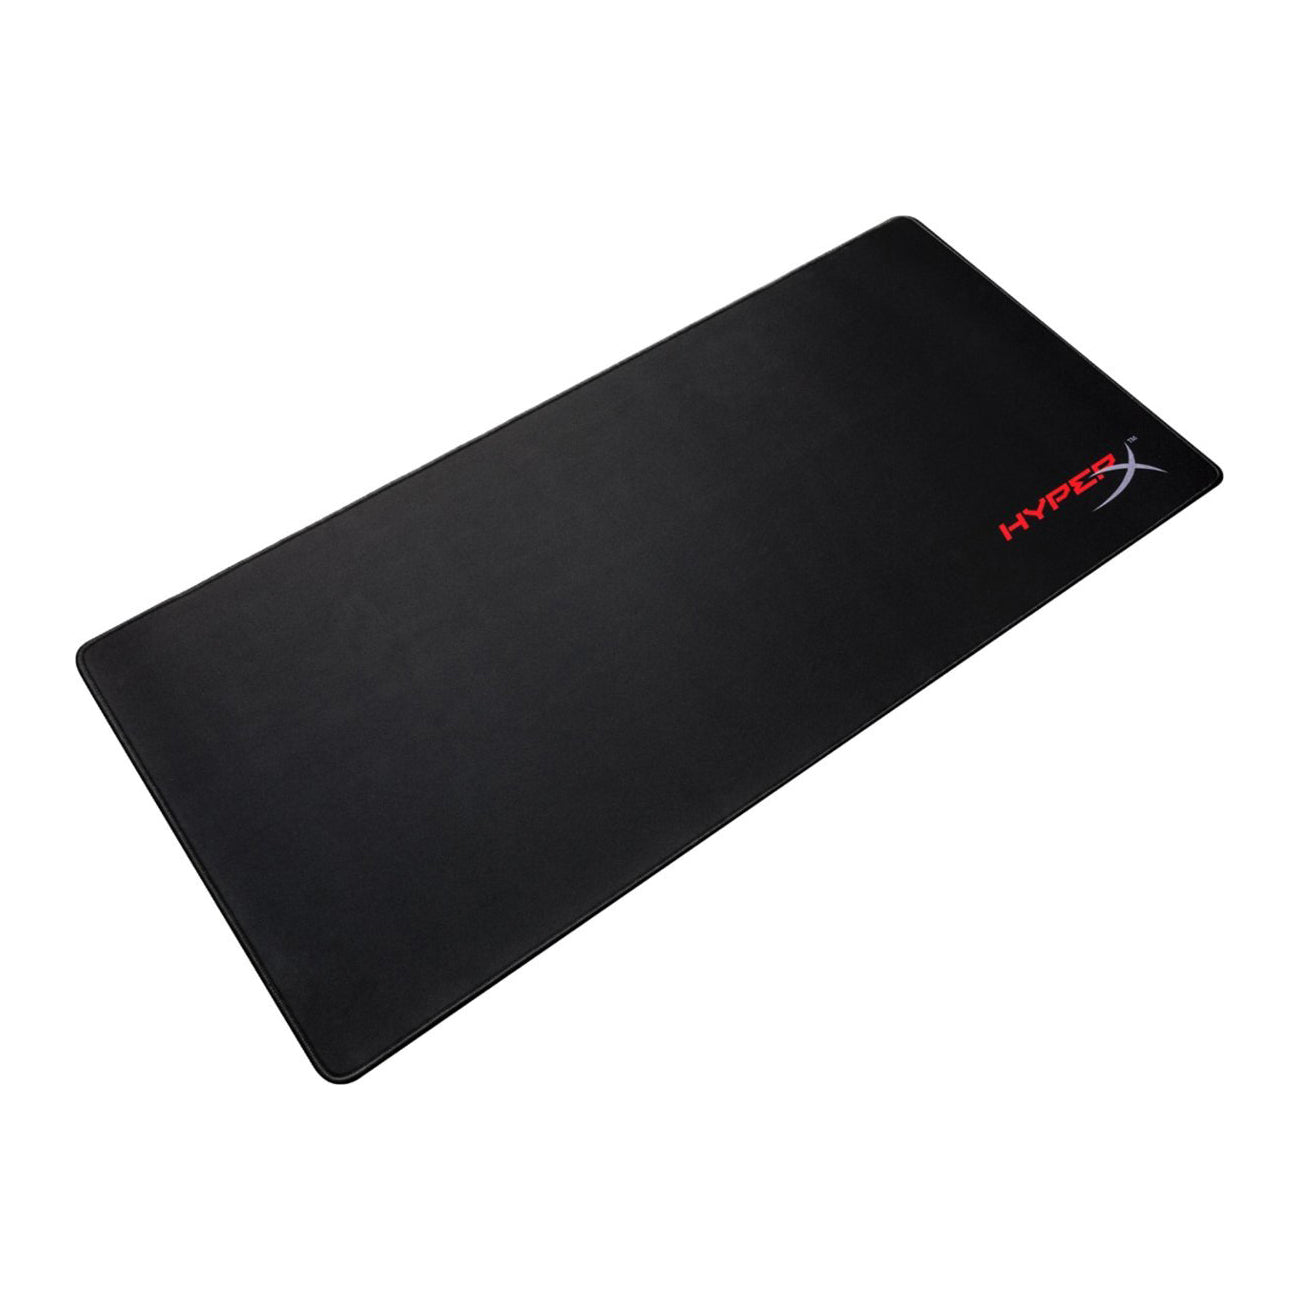 Hyperx Fury S | X-Large Size Pro Gaming Mouse Pad (Brand New)